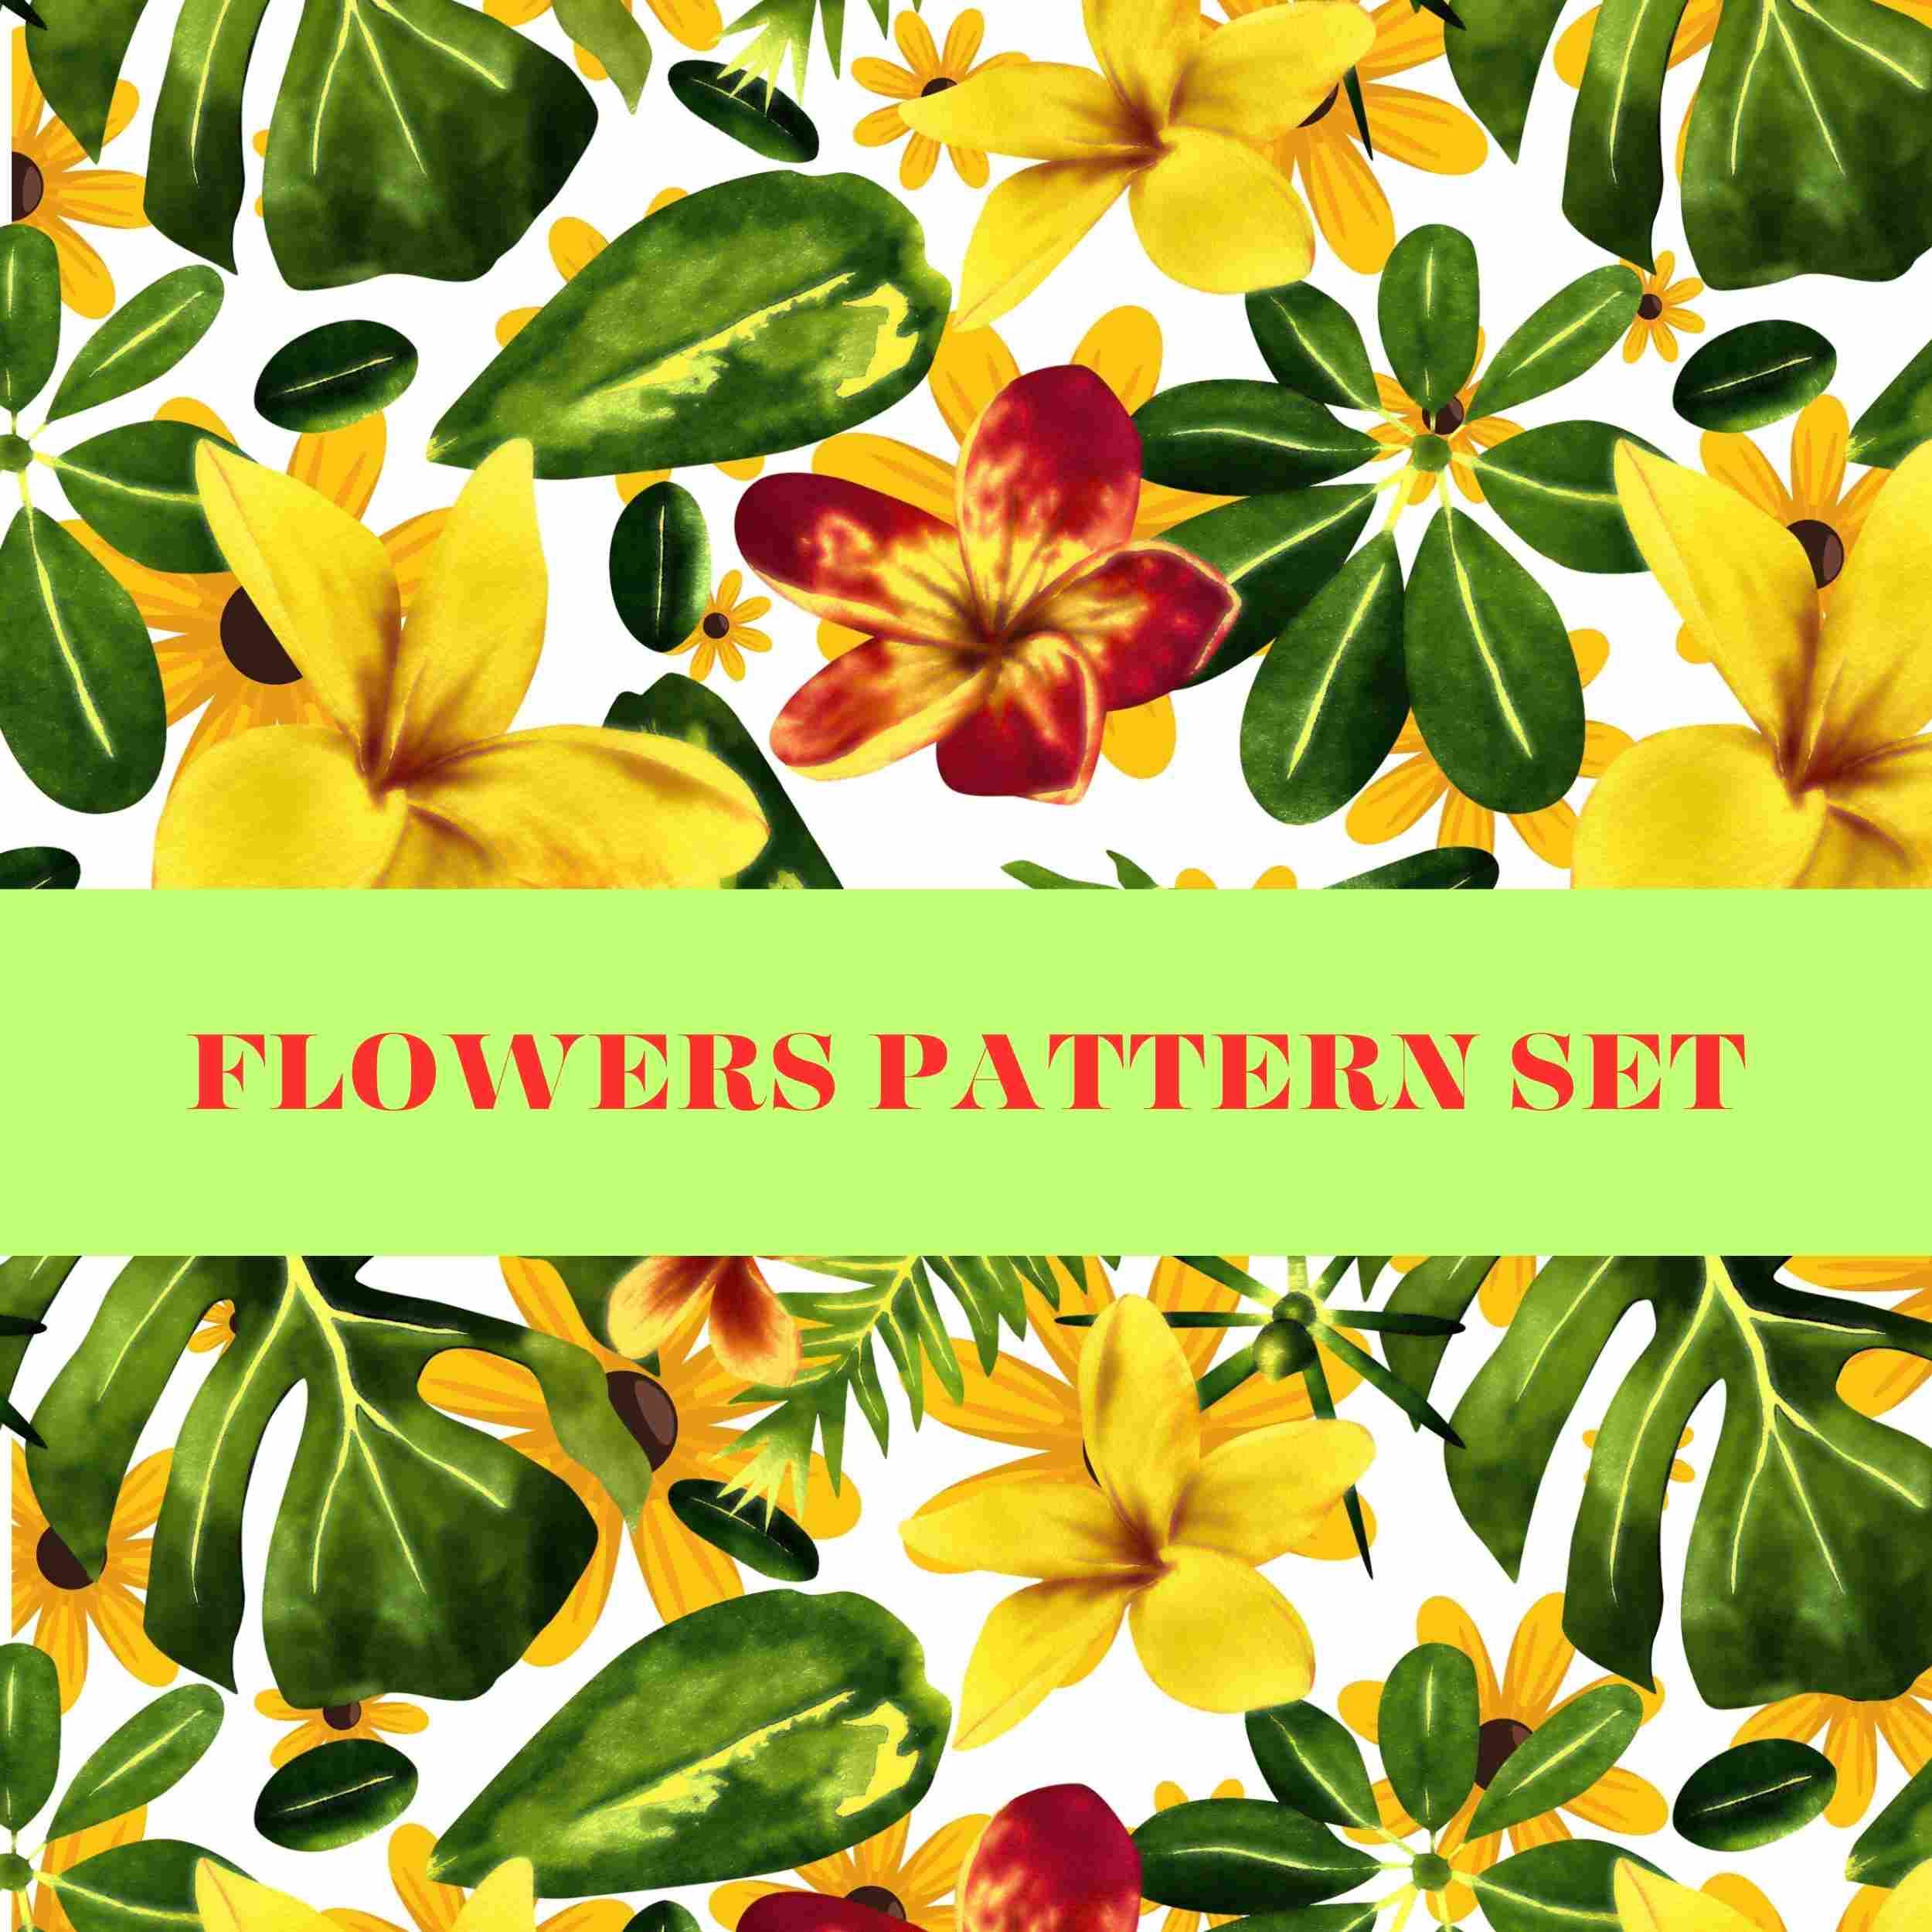 Flowers pattern set cover image.